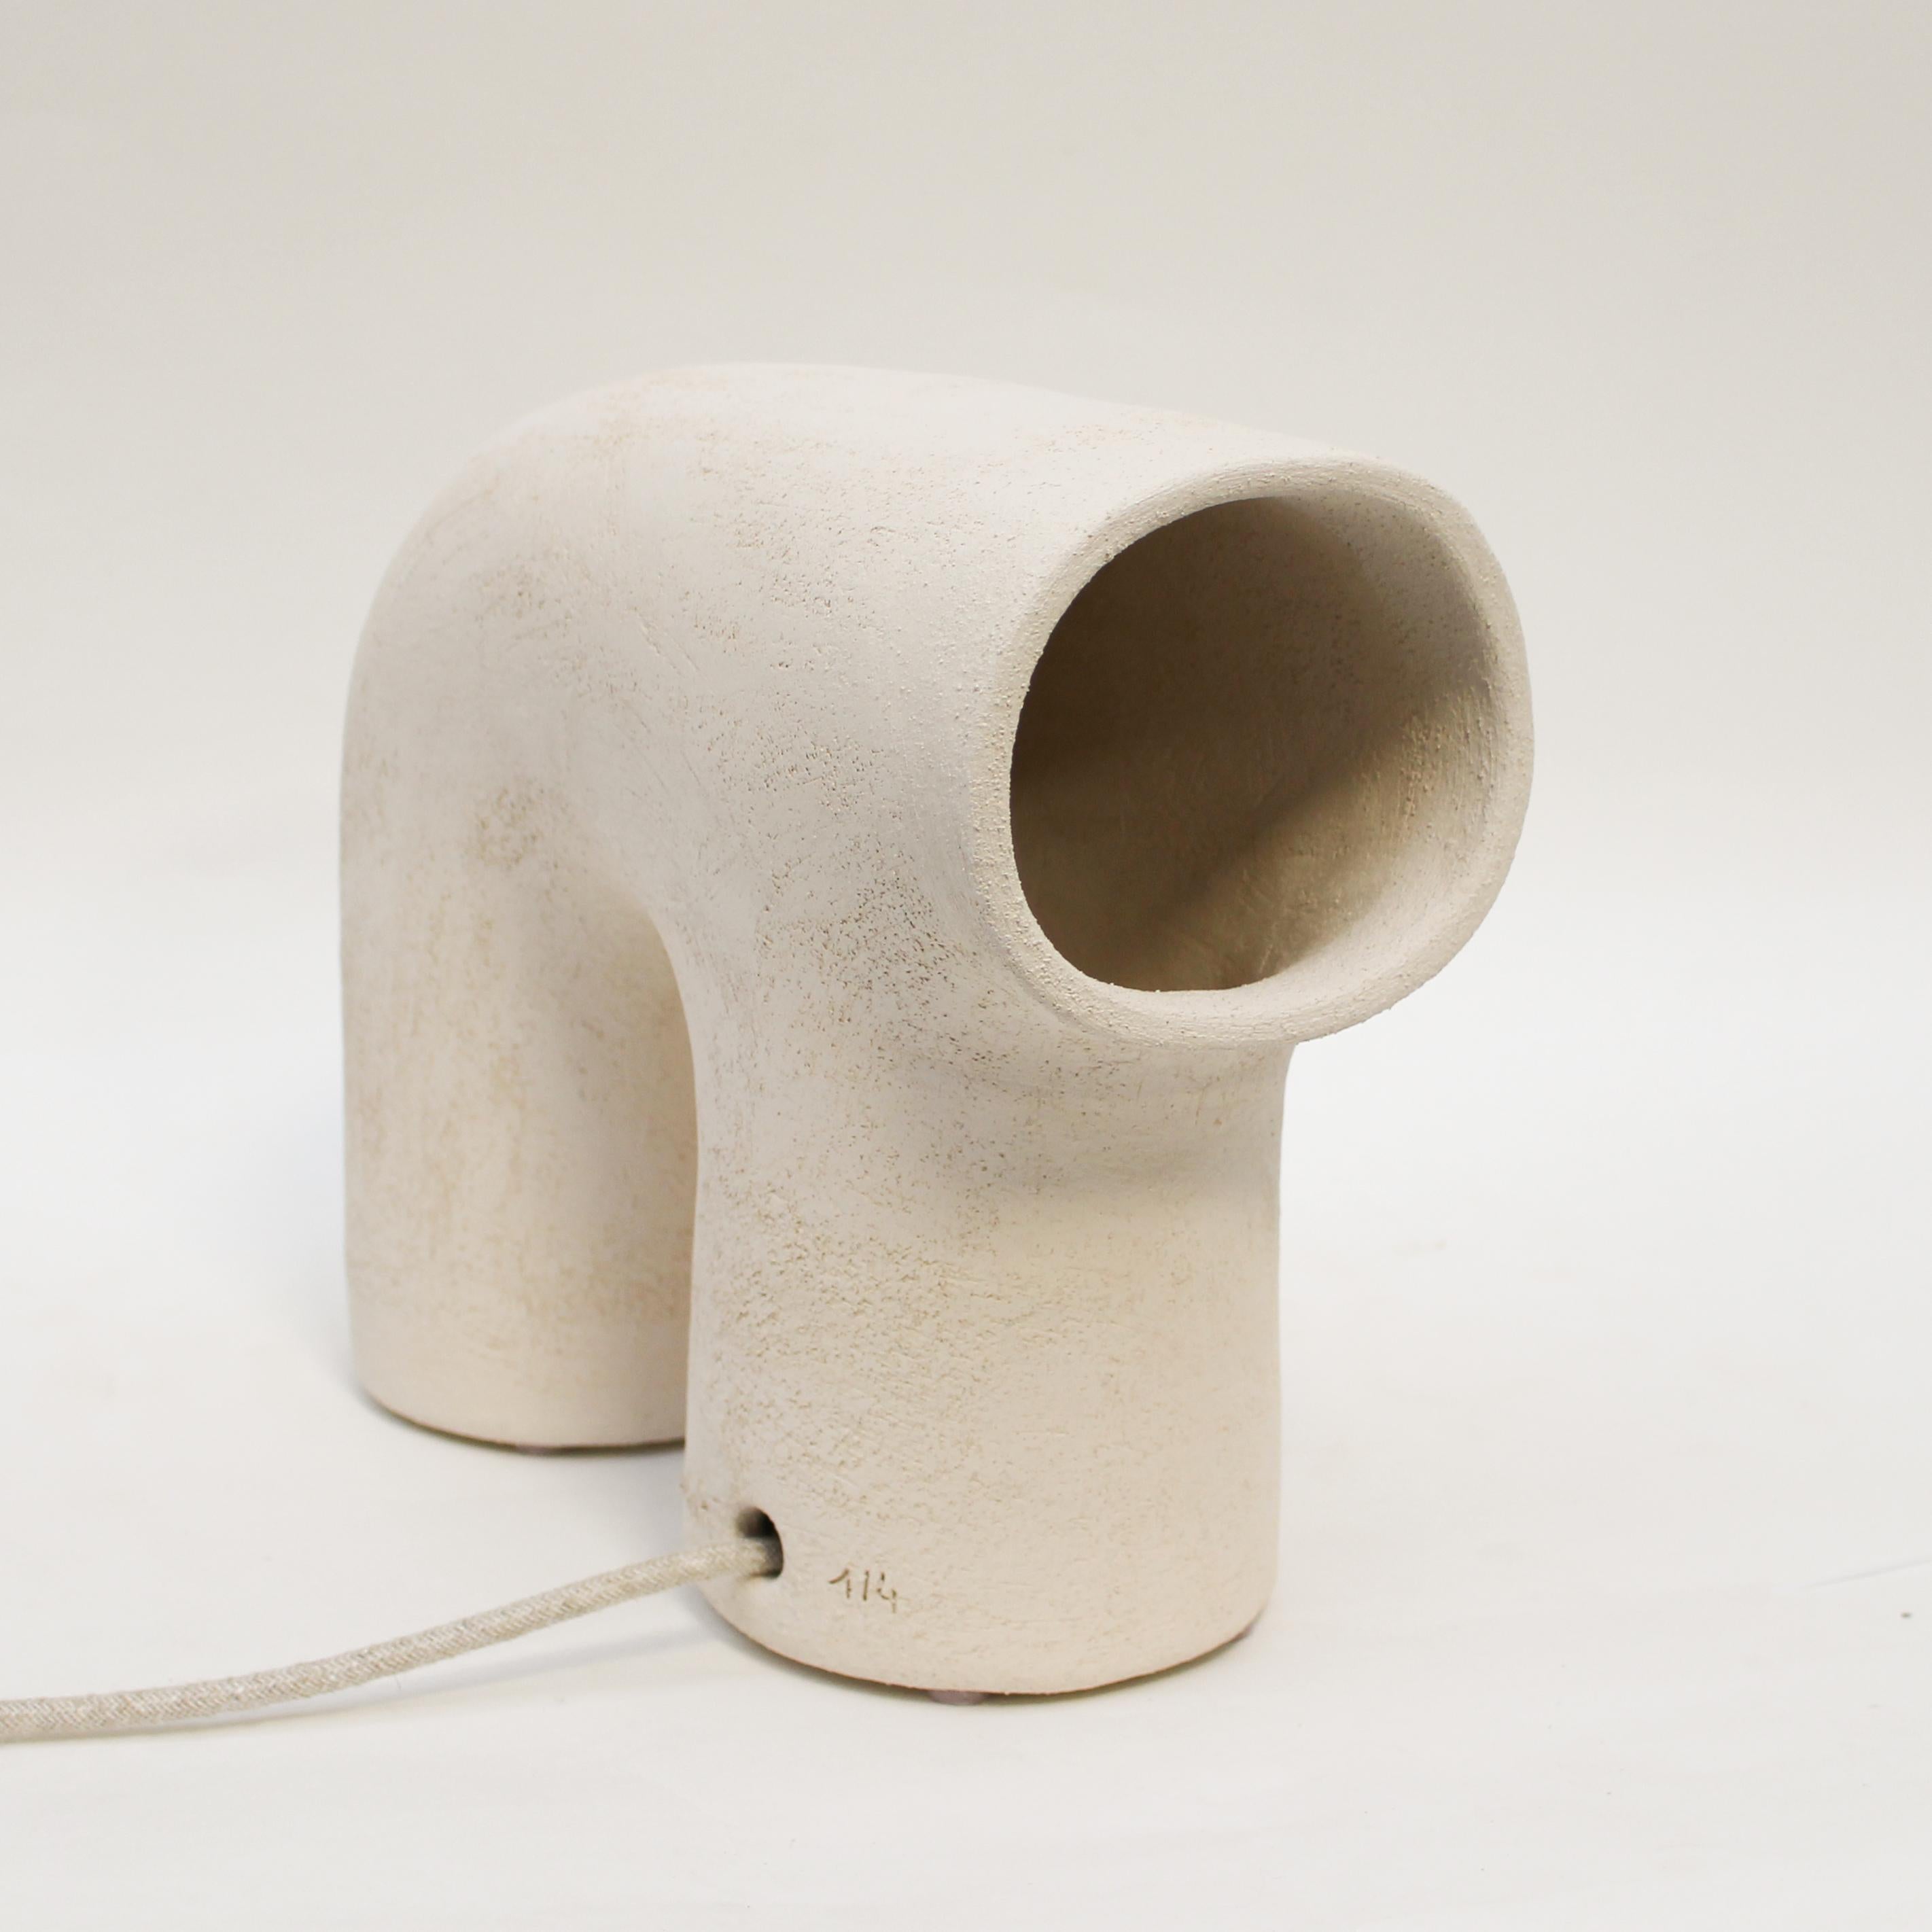 Arche #5 stoneware lamp by Elisa Uberti
Dimensions: D 10 x W 20 x H 25 cm
Materials: white stoneware.
This product is handmade, dimensions may vary.


All our lamps can be wired according to each country. If sold to the USA it will be wired for the